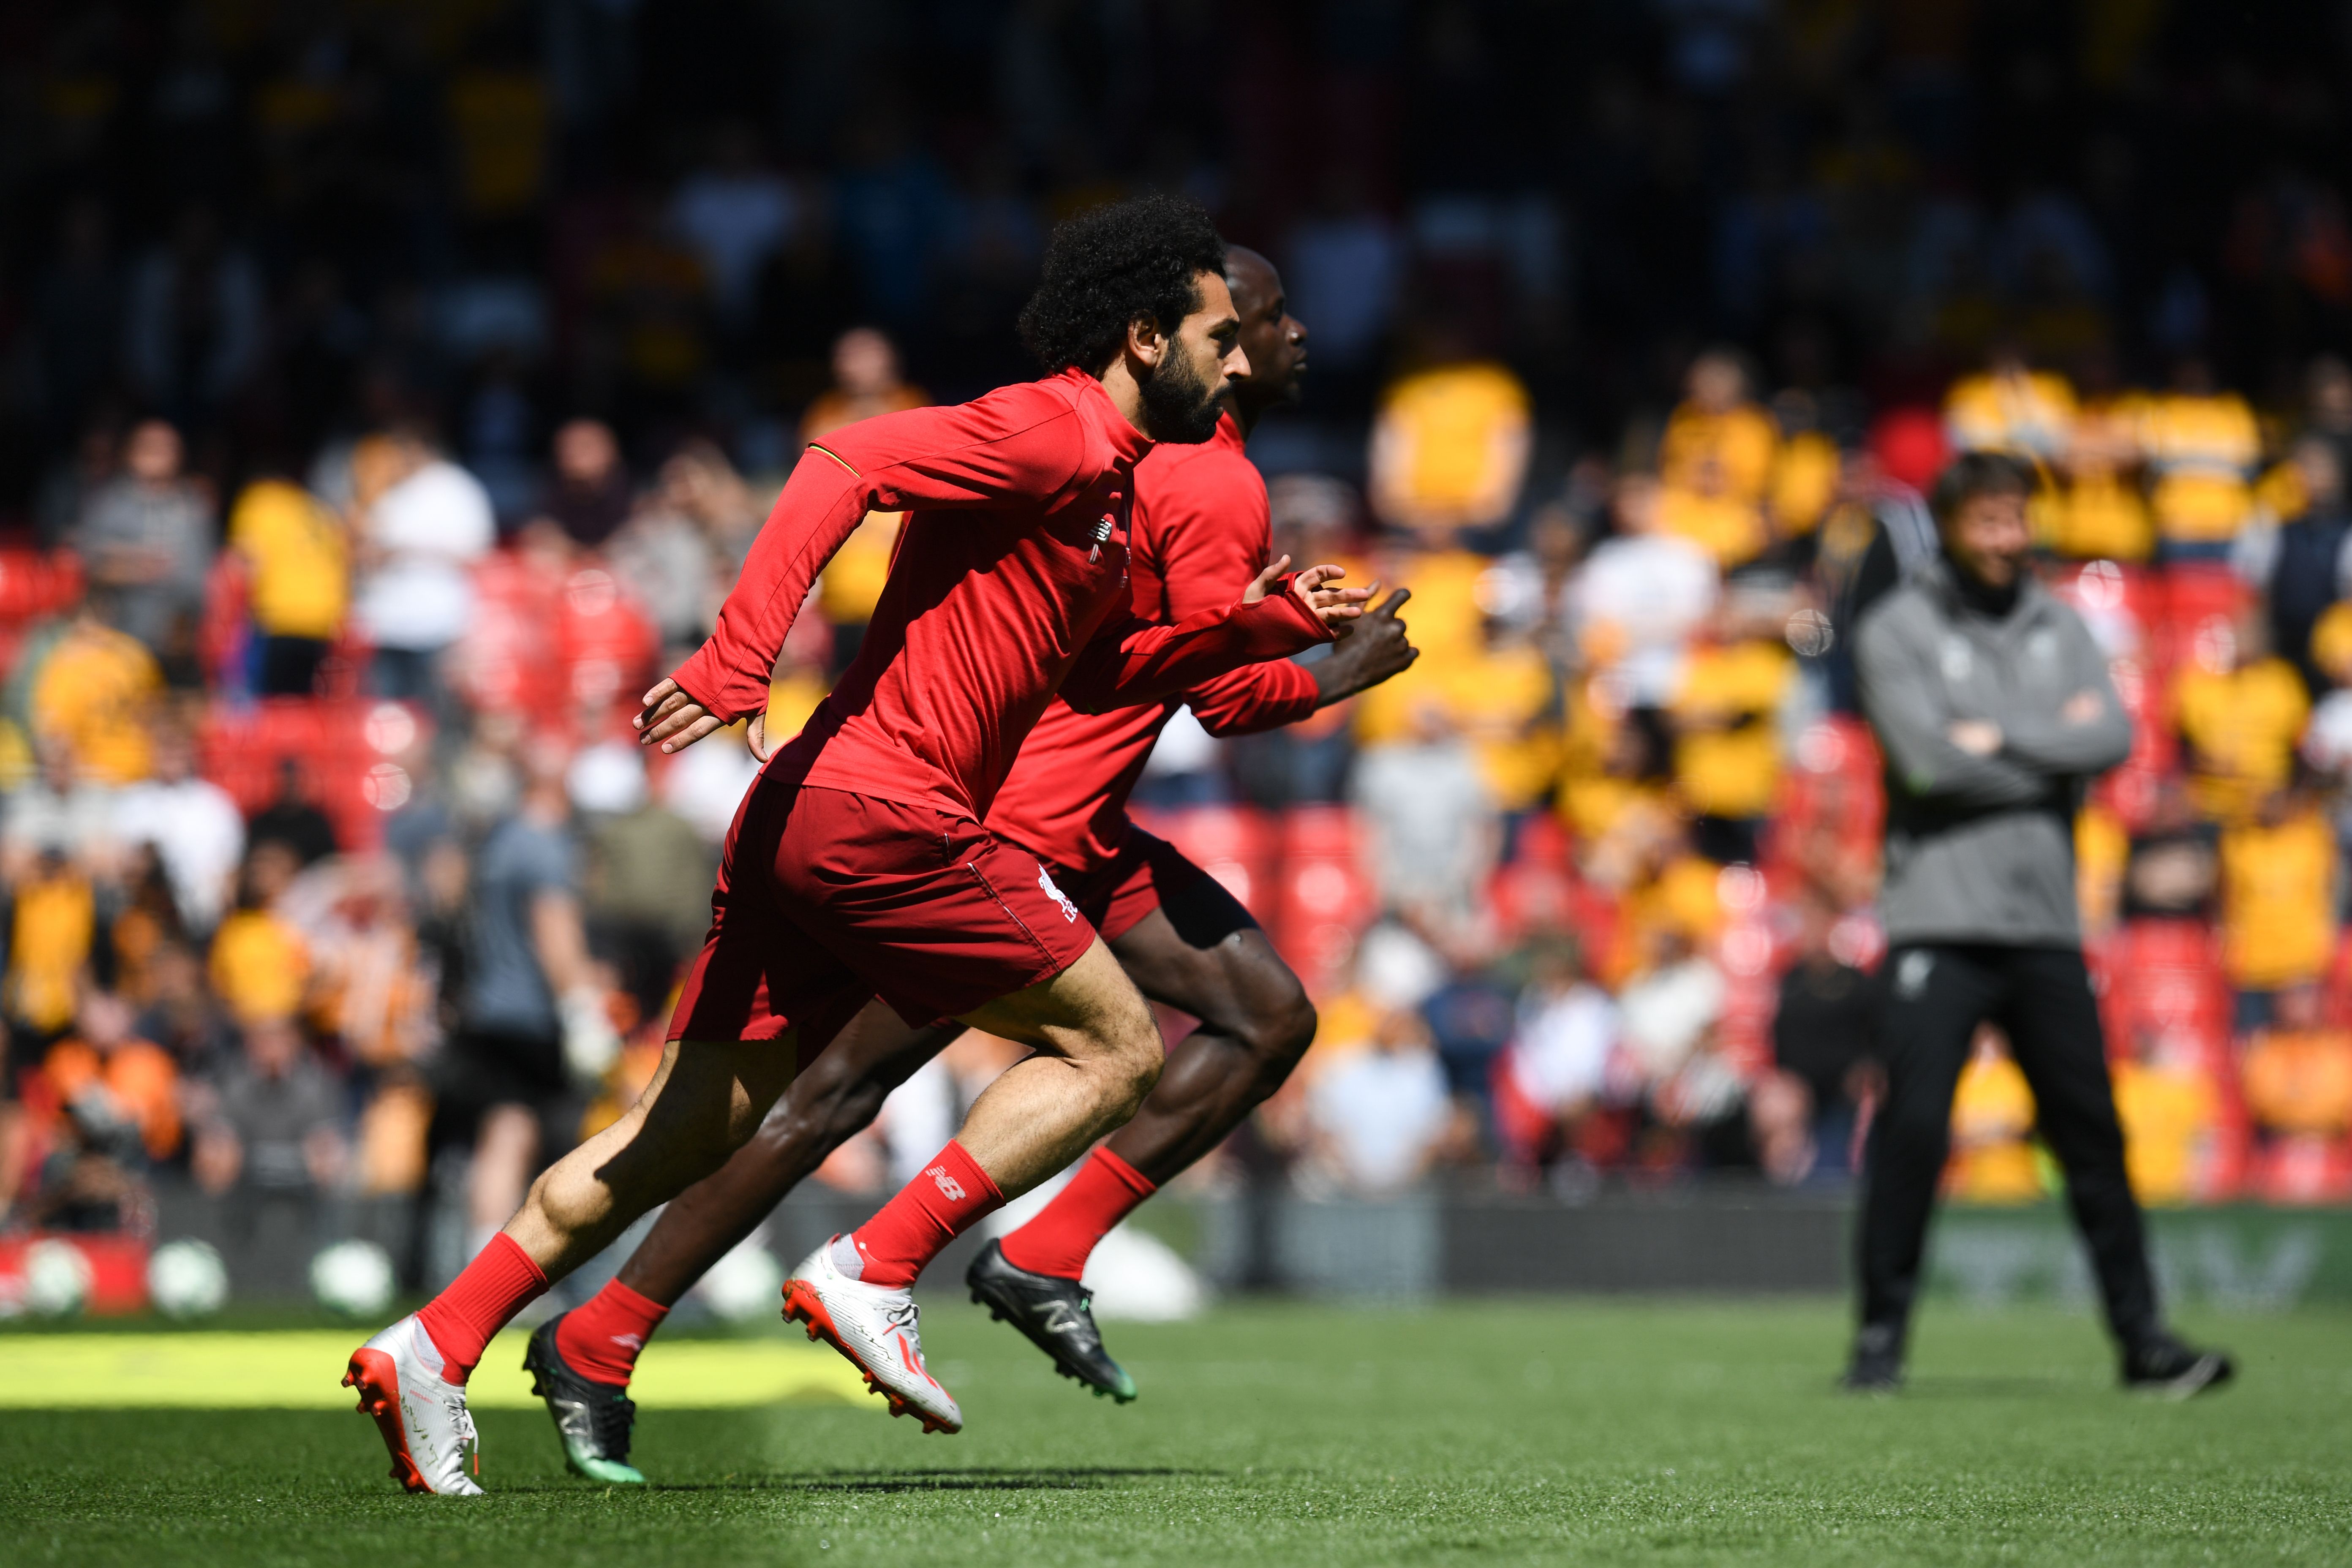 TOPSHOT - Liverpool's Egyptian midfielder Mohamed Salah (L) and Liverpool's Senegalese striker Sadio Mane (R) warm up for the English Premier League football match between Liverpool and Wolverhampton Wanderers at Anfield in Liverpool, north west England on May 12, 2019. (Photo by Paul ELLIS / AFP) / RESTRICTED TO EDITORIAL USE. No use with unauthorized audio, video, data, fixture lists, club/league logos or 'live' services. Online in-match use limited to 120 images. An additional 40 images may be used in extra time. No video emulation. Social media in-match use limited to 120 images. An additional 40 images may be used in extra time. No use in betting publications, games or single club/league/player publications. /         (Photo credit should read PAUL ELLIS/AFP/Getty Images)